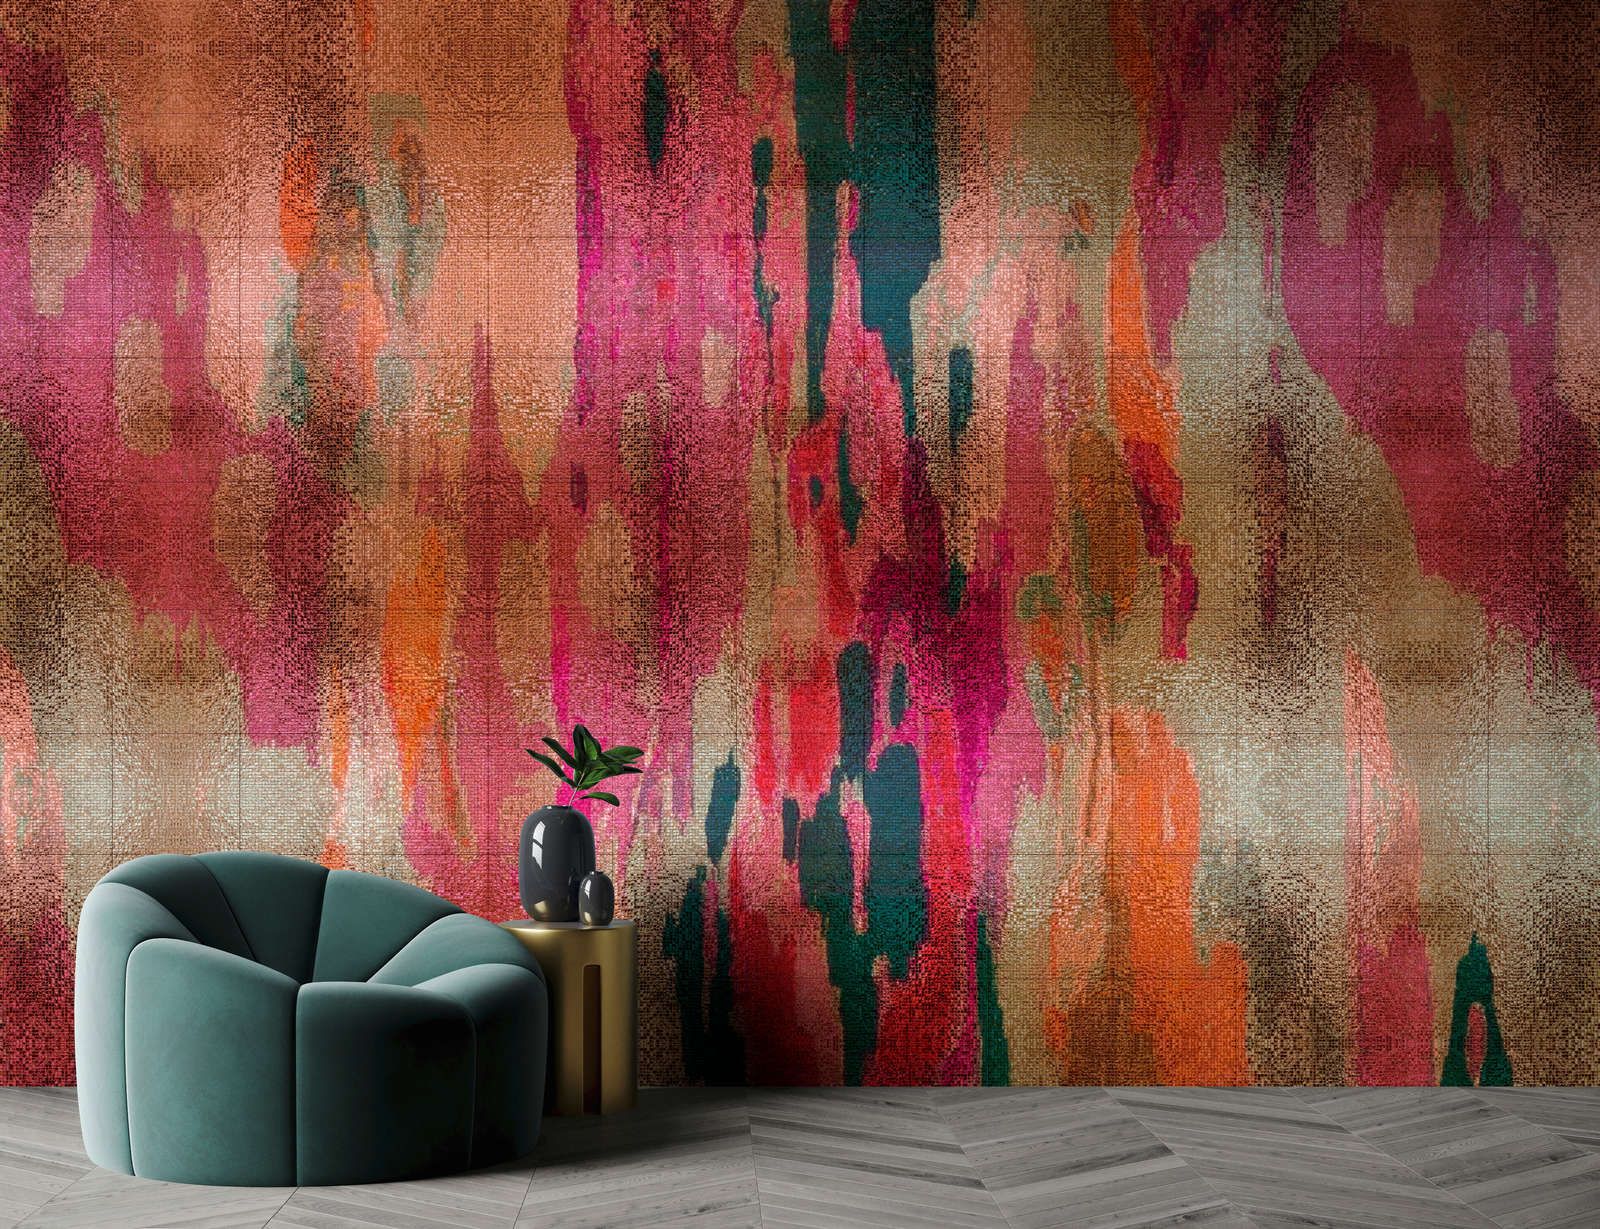             Photo wallpaper »marielle 2« - Colour gradients violet, orange, petrol with mosaic structure - Lightly textured non-woven fabric
        